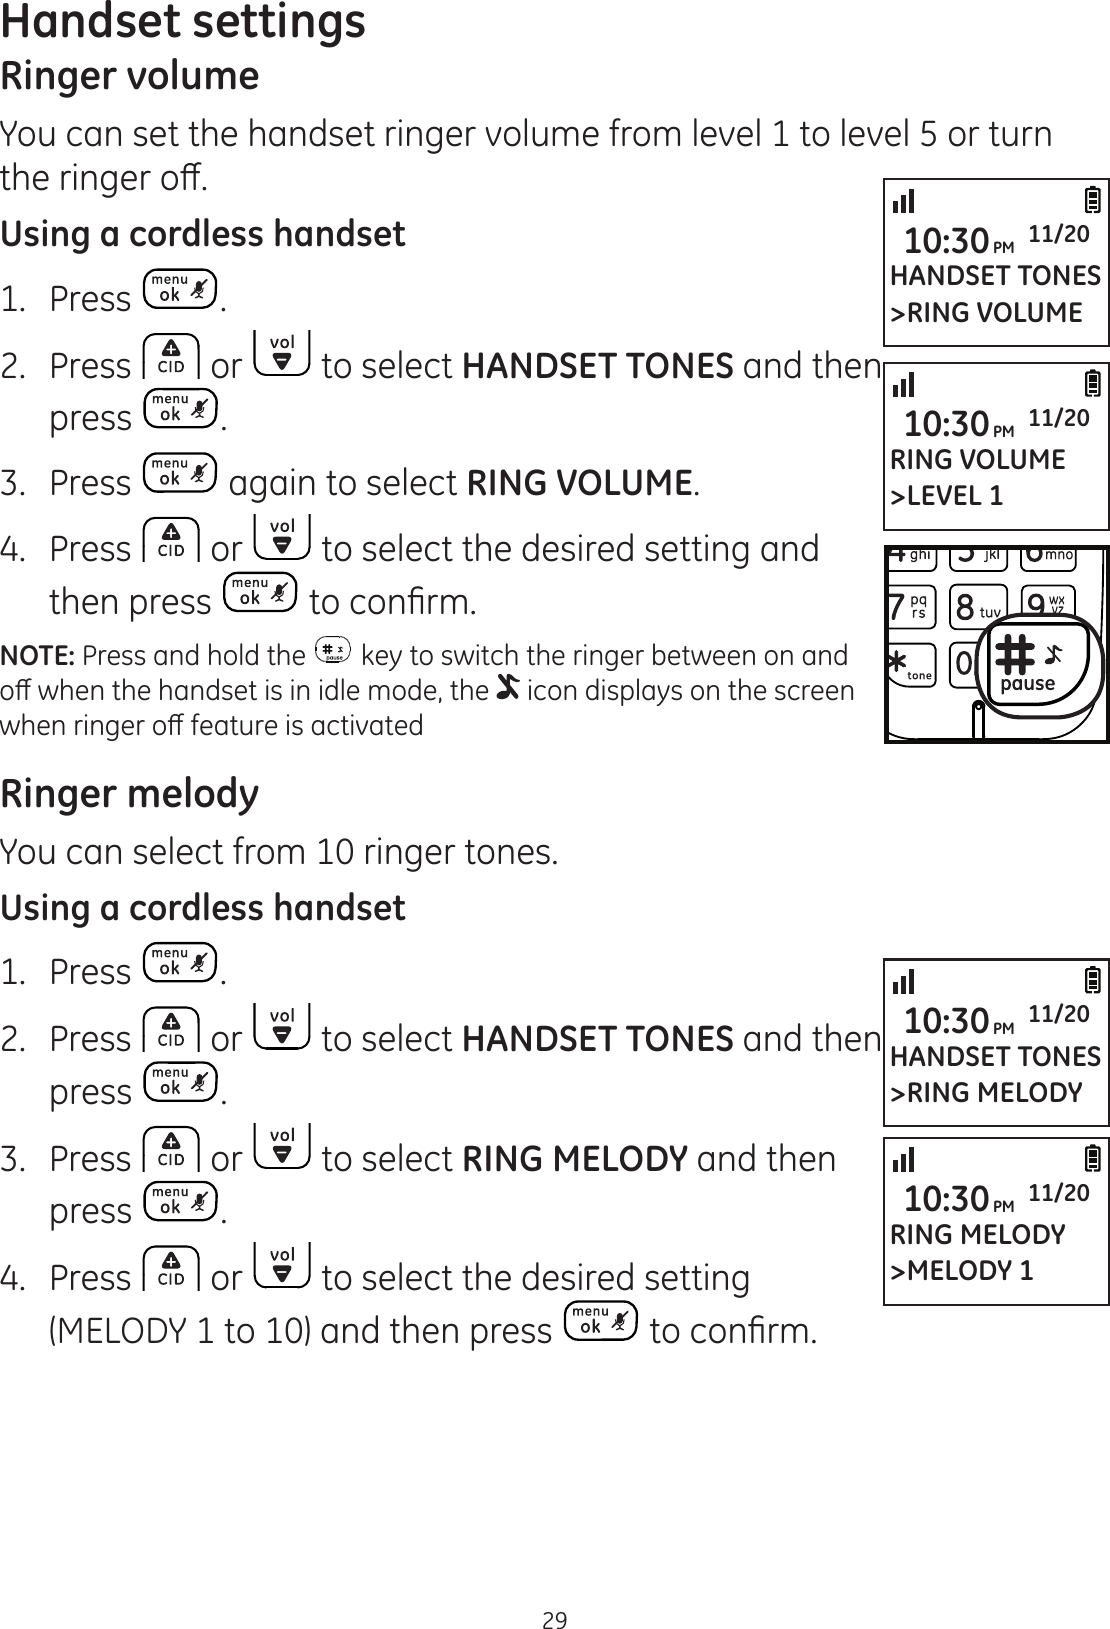 29Handset settingsRinger volumeYou can set the handset ringer volume from level 1 to level 5 or turn WKHULQJHURȺUsing a cordless handset1.  Press .2.  Press   or   to select HANDSET TONES and then press  .3.  Press   again to select RING VOLUME.4.  Press   or   to select the desired setting and then press  WRFRQ¿UPNOTE: Press and hold the   key to switch the ringer between on and RȺZKHQWKHKDQGVHWLVLQLGOHPRGHWKH  icon displays on the screen ZKHQULQJHURȺIHDWXUHLVDFWLYDWHGRinger melodyYou can select from 10 ringer tones.Using a cordless handset1.  Press  .2.  Press   or   to select HANDSET TONES and then press  .3.  Press   or   to select RING MELODY and then press  .4.  Press   or   to select the desired setting (MELODY 1 to 10) and then press  WRFRQ¿UPHANDSET TONES&gt;RING VOLUME10:30PM 11/20RING VOLUME&gt;LEVEL 110:30PM 11/20HANDSET TONES&gt;RING MELODY10:30PM 11/20RING MELODY&gt;MELODY 110:30PM 11/20